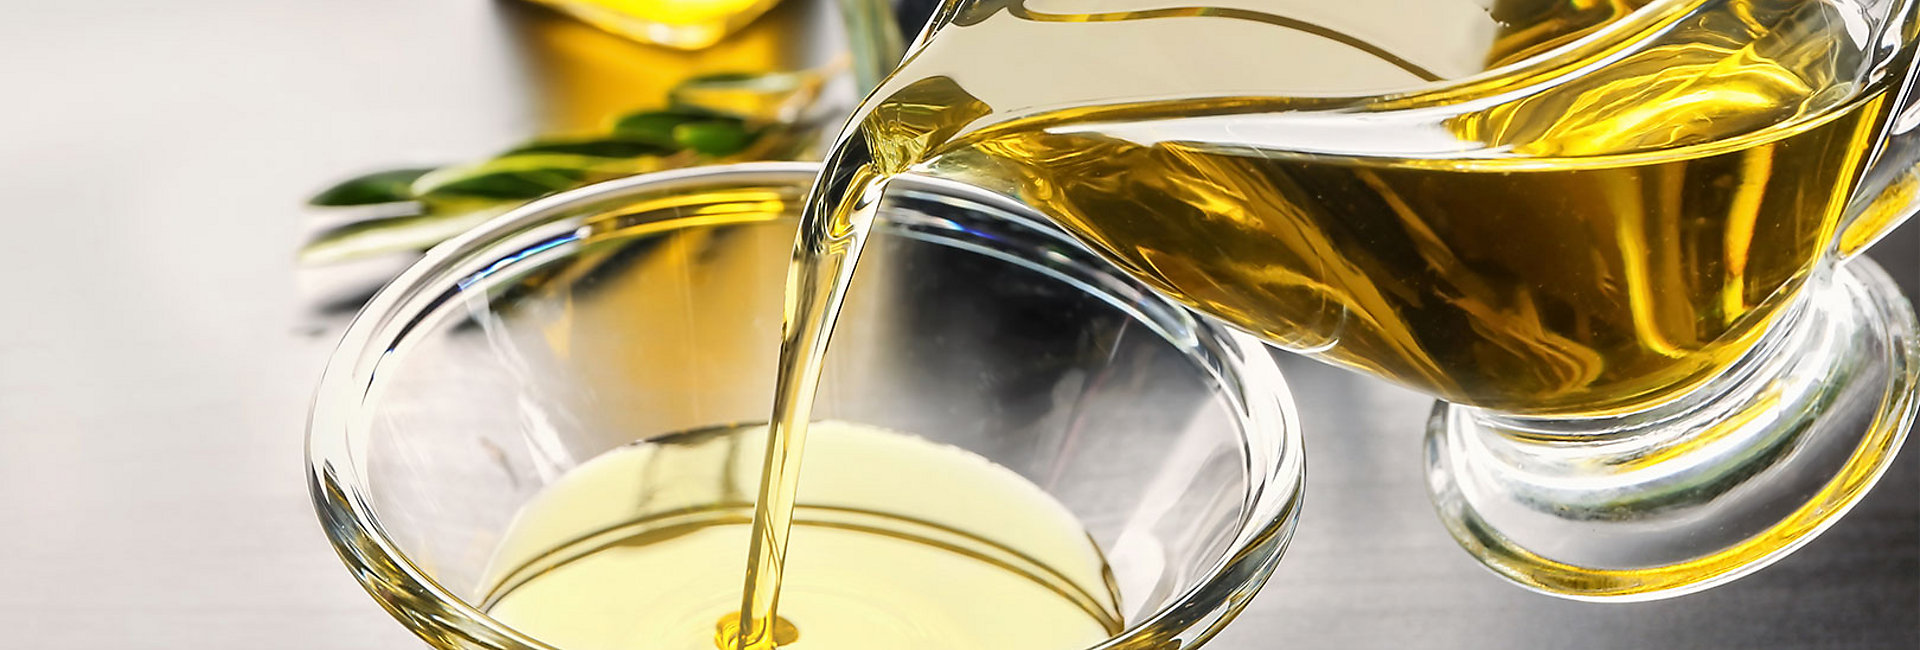 Fats and Oils Banner Image